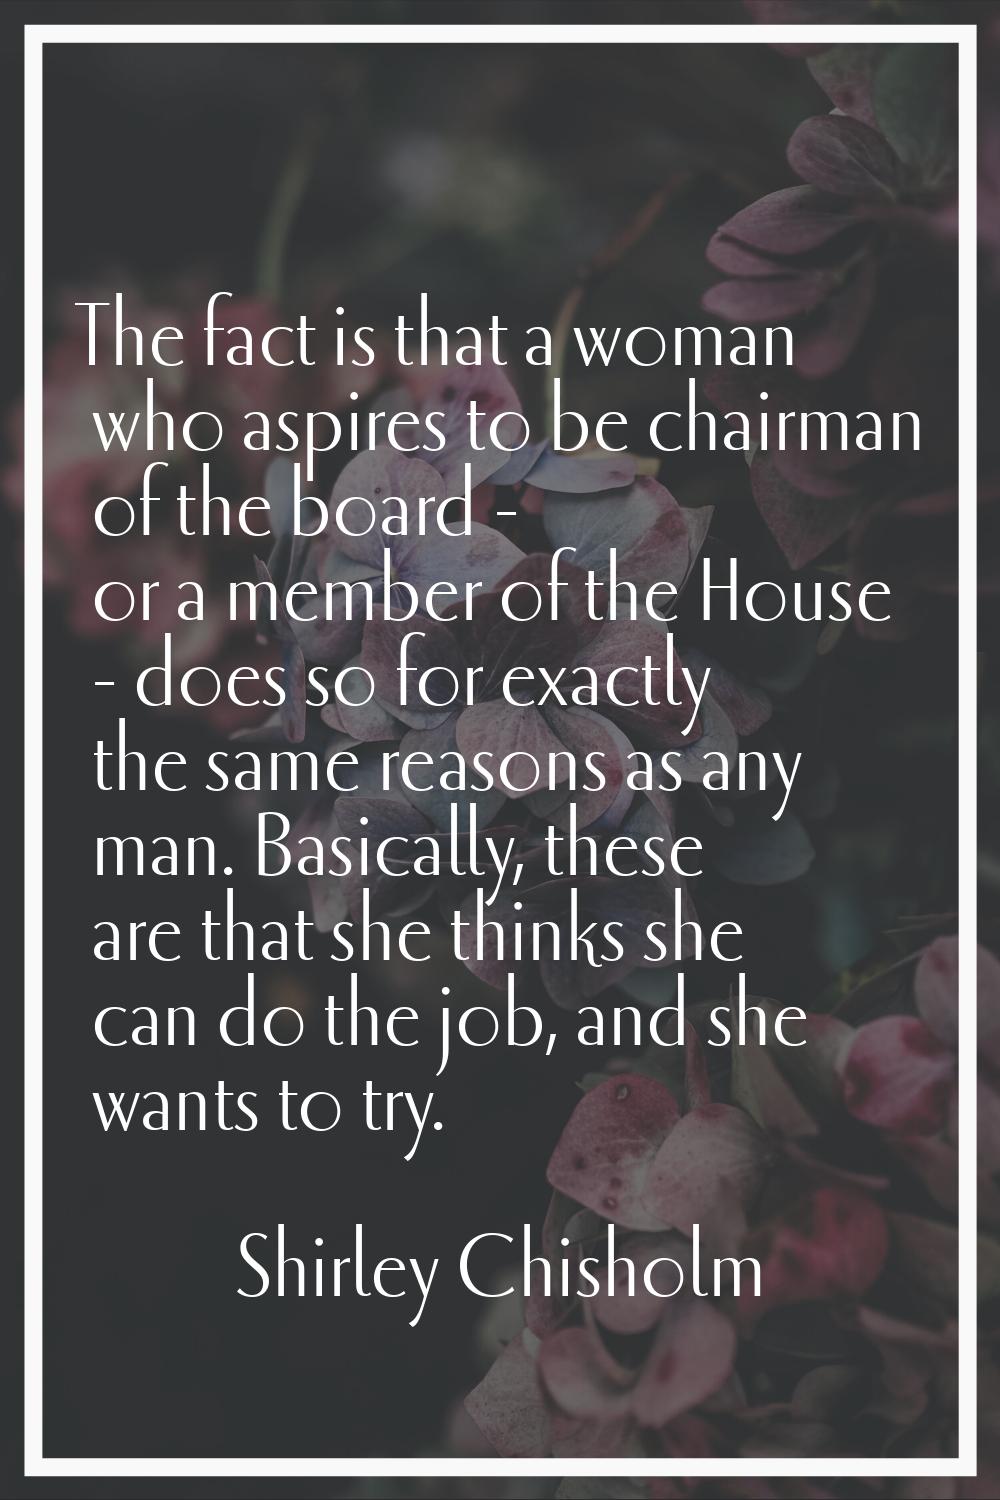 The fact is that a woman who aspires to be chairman of the board - or a member of the House - does 